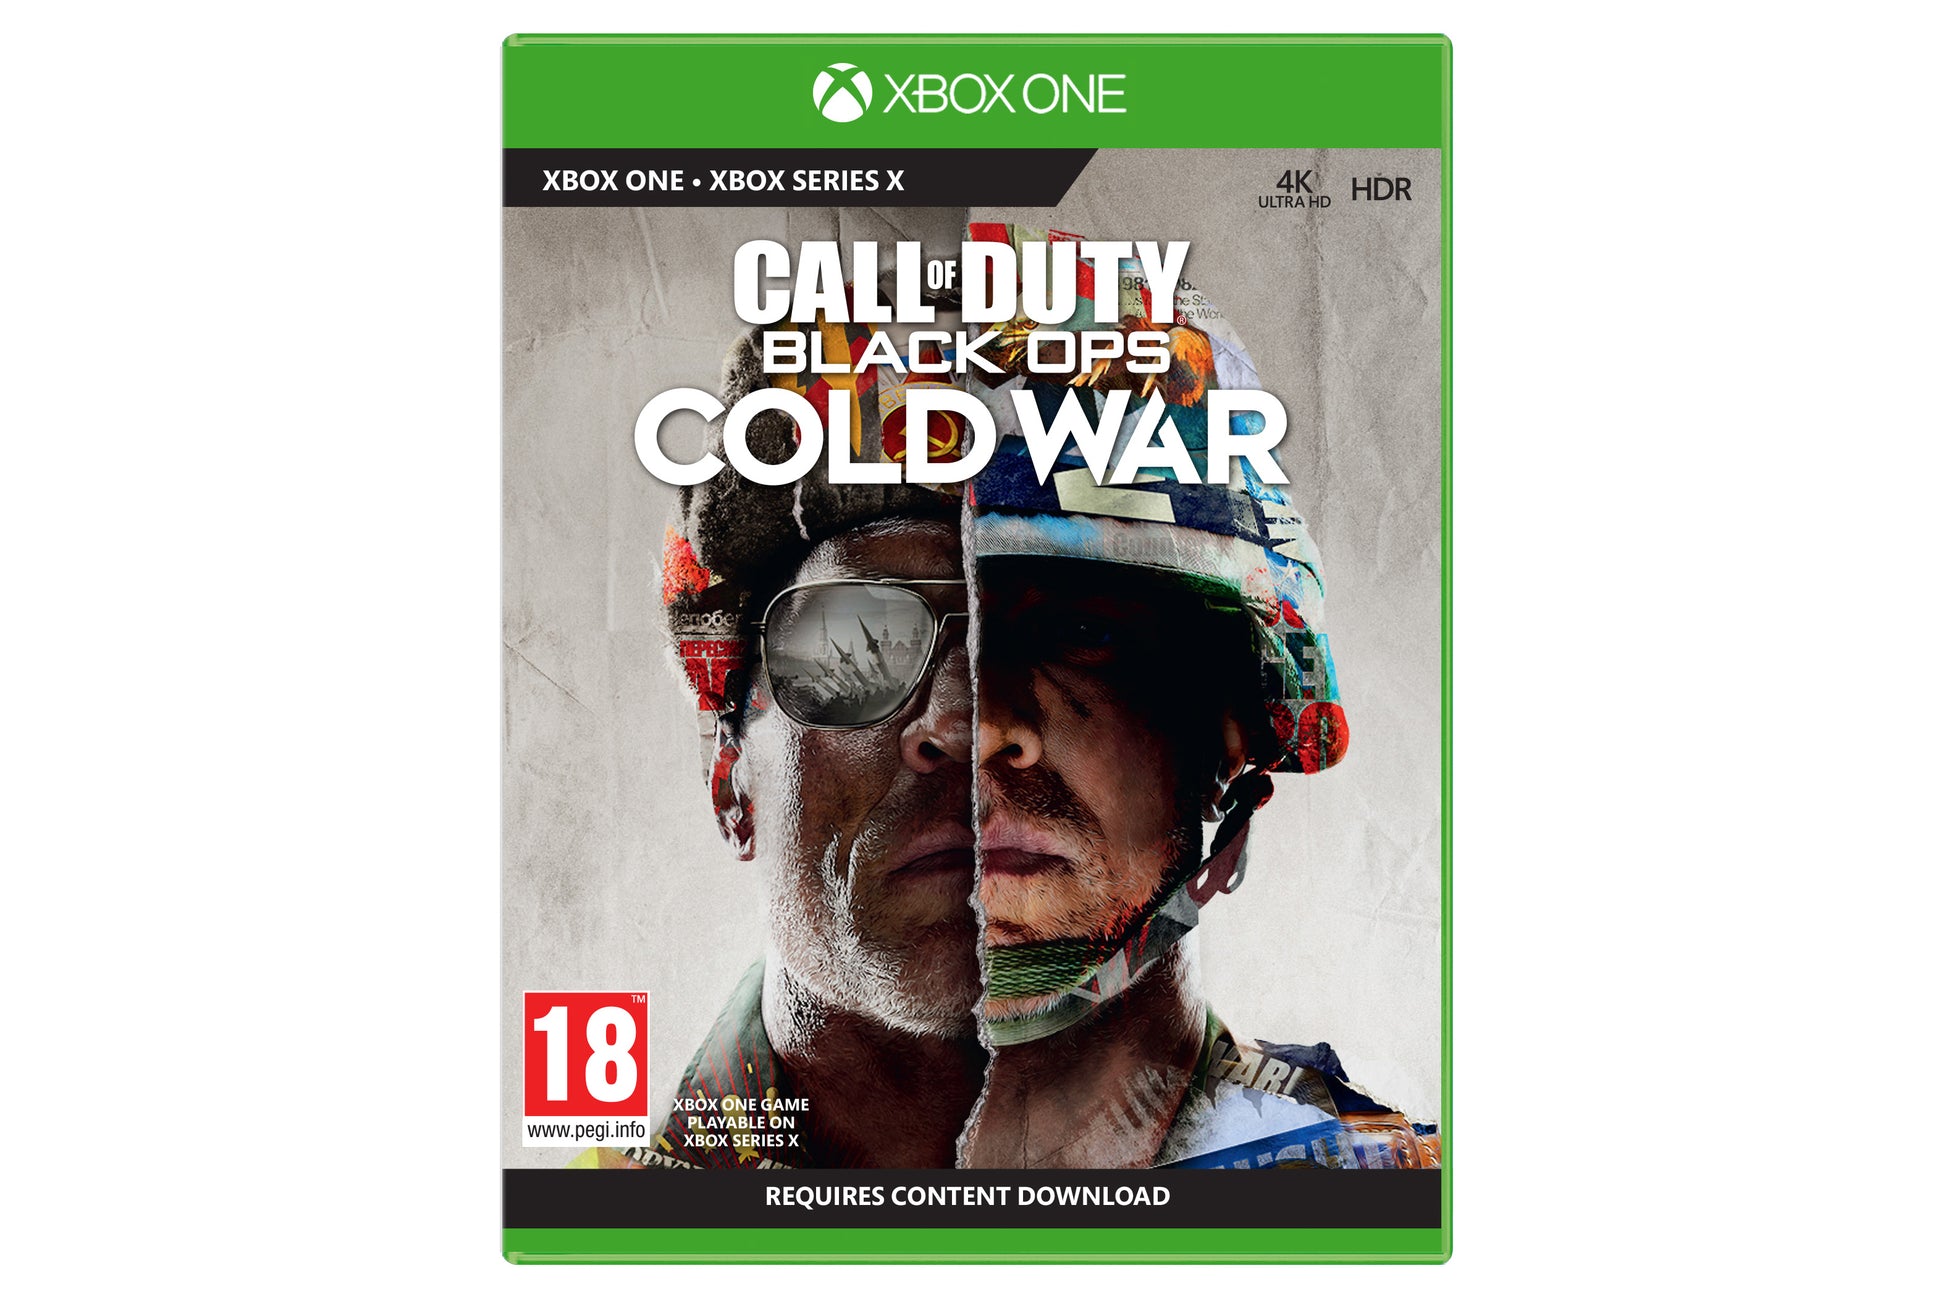 Microsoft Xbox One Call of Duty: Black Ops Cold War Game - maplin.co.uk